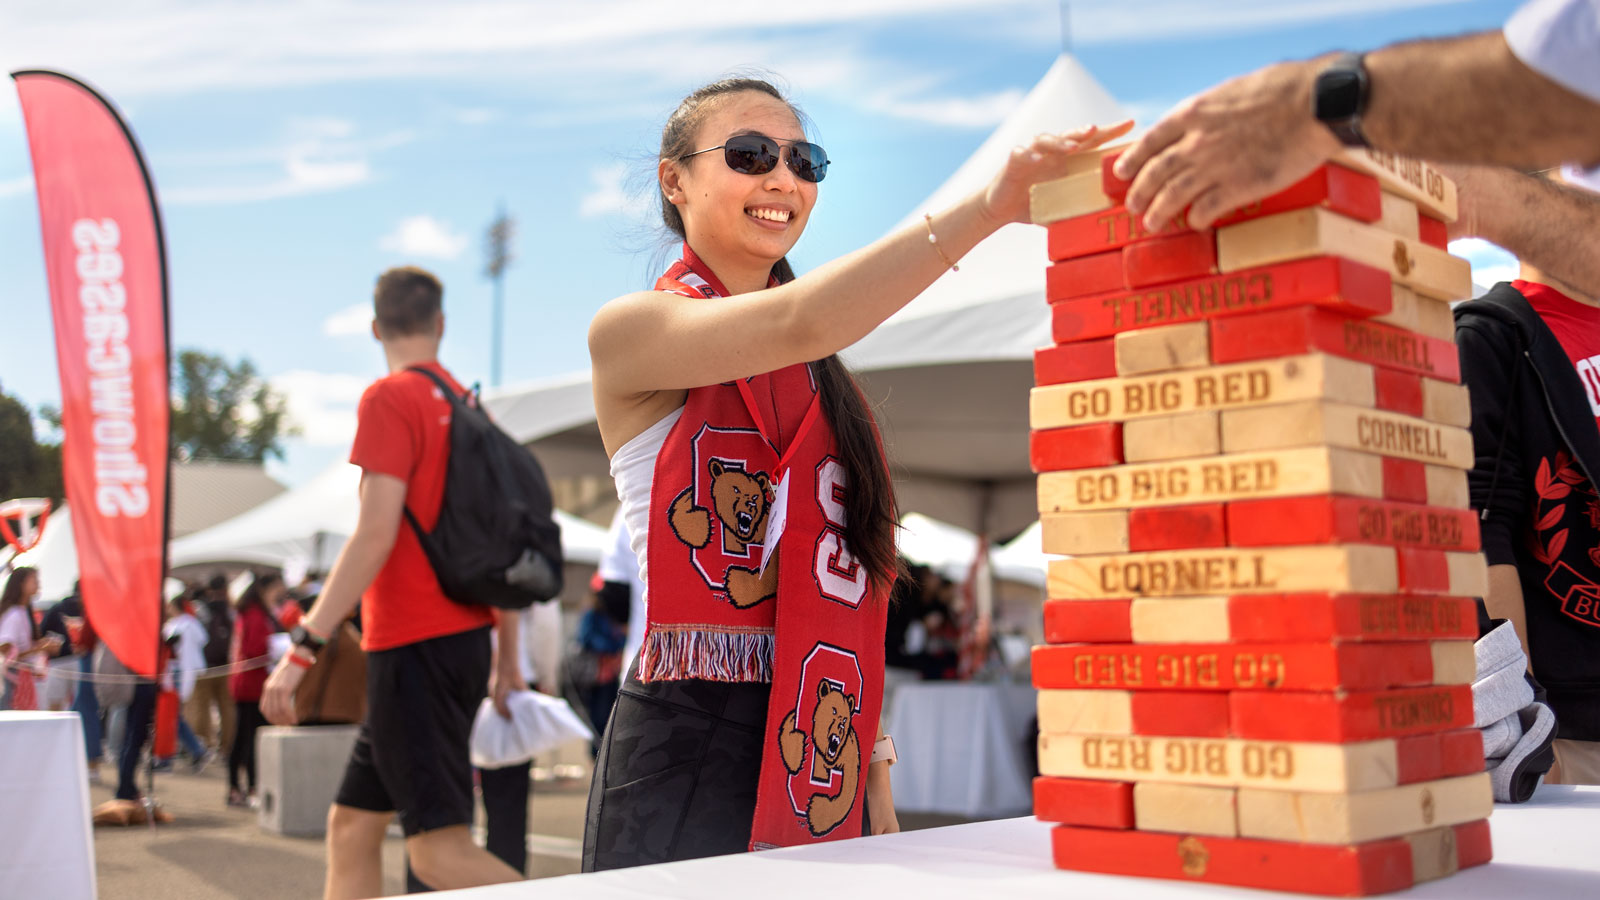 Big Red Jenga was one of many activities at the Big Red Fan Festival in the Crescent Lot